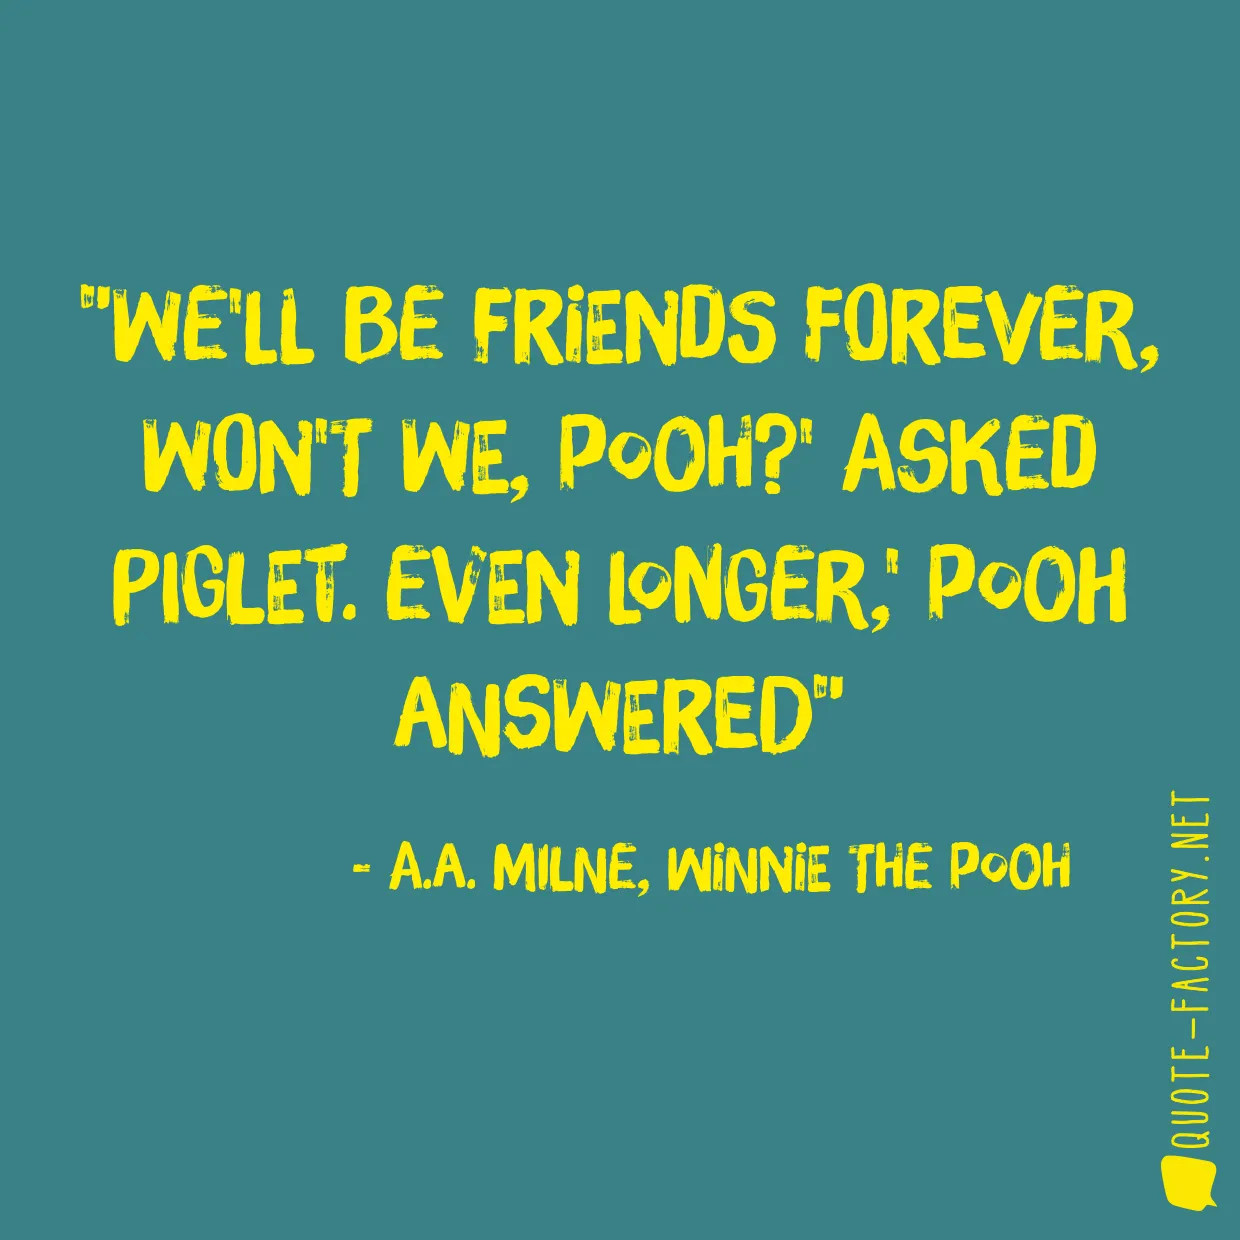 We'll be Friends Forever, won't we, Pooh?' asked Piglet. Even longer,' Pooh answered